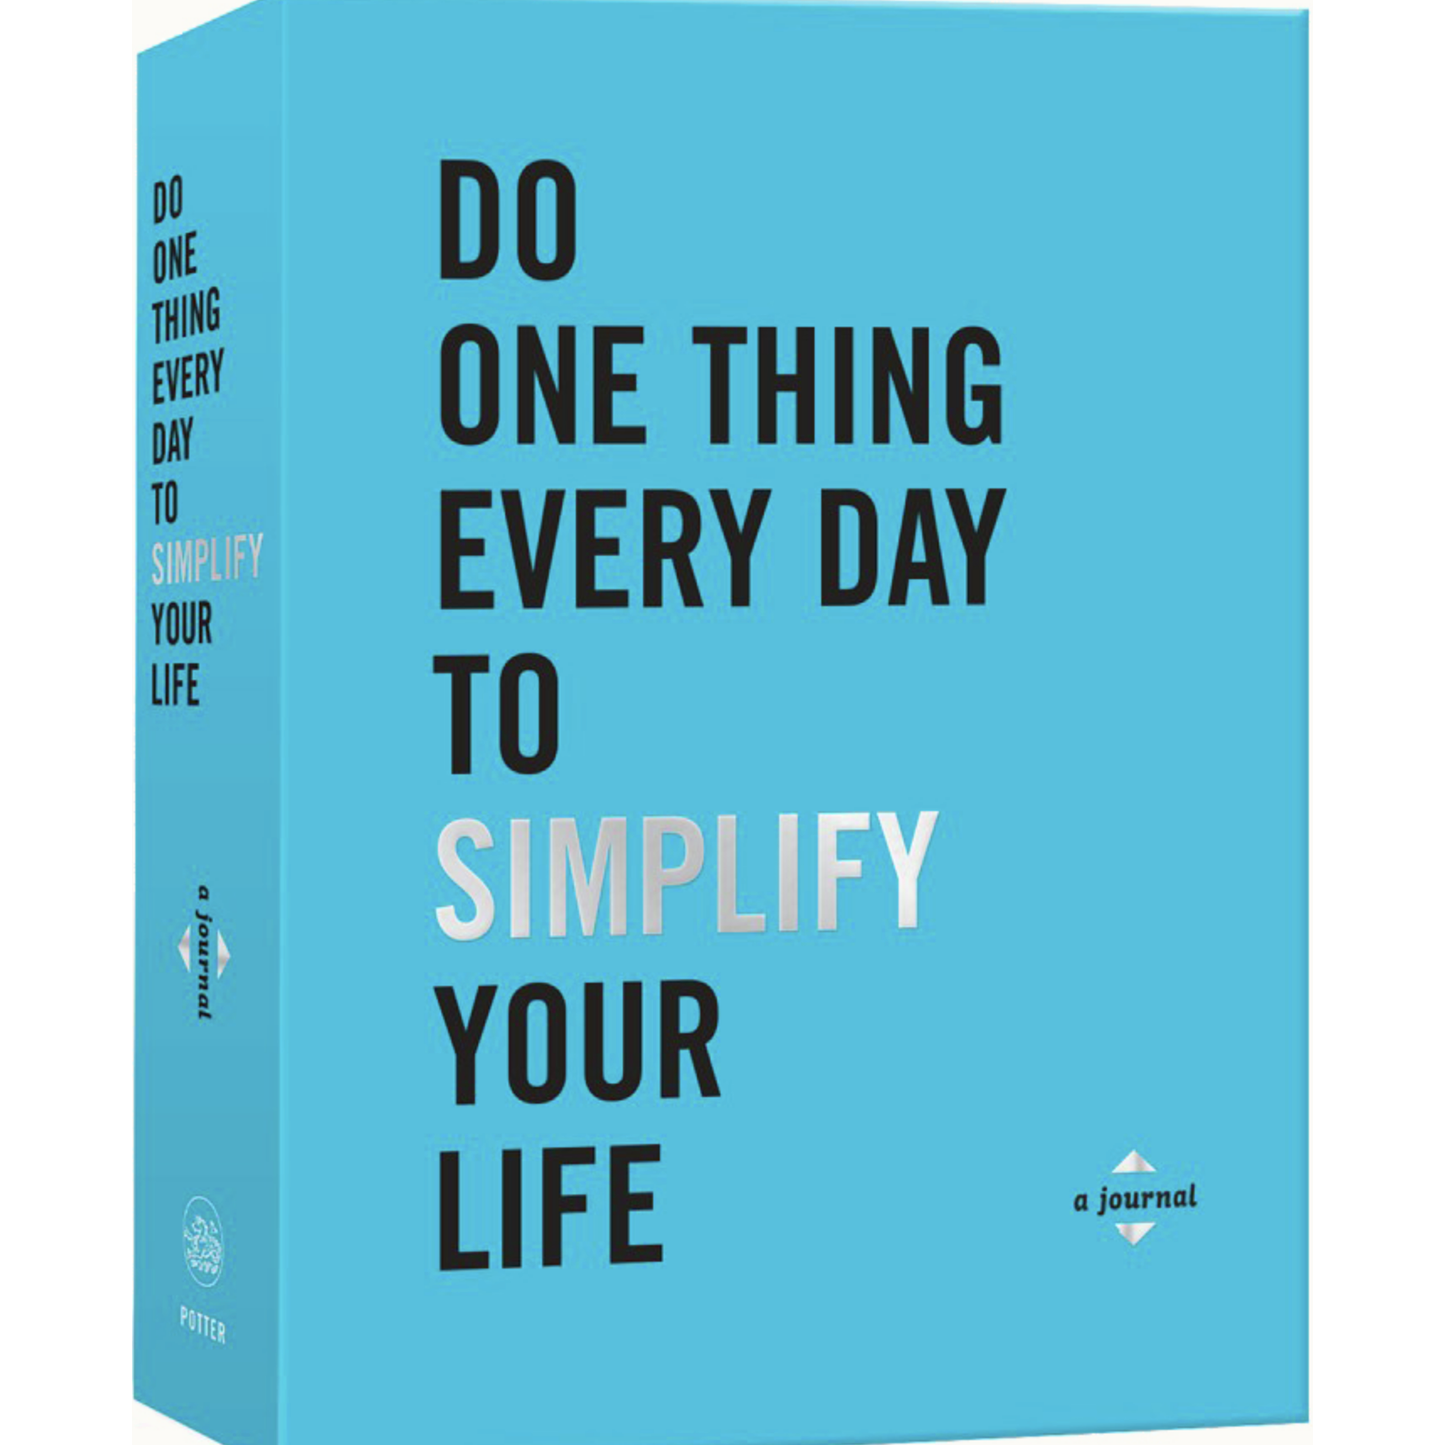 Do One Thing Every Day to Simplify Your Life